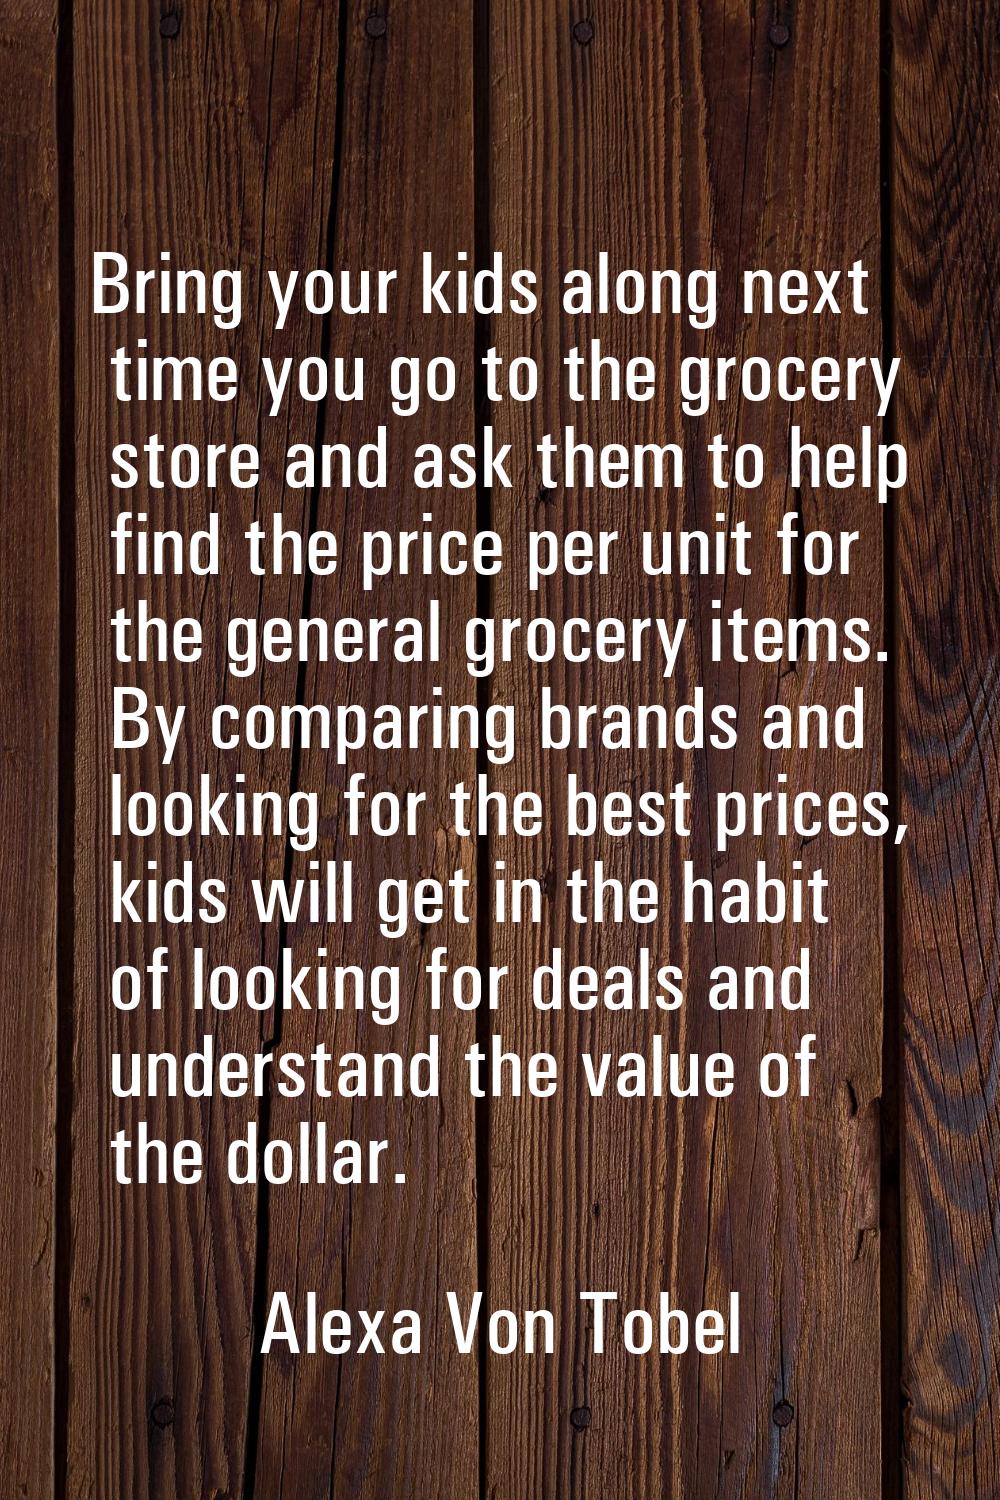 Bring your kids along next time you go to the grocery store and ask them to help find the price per